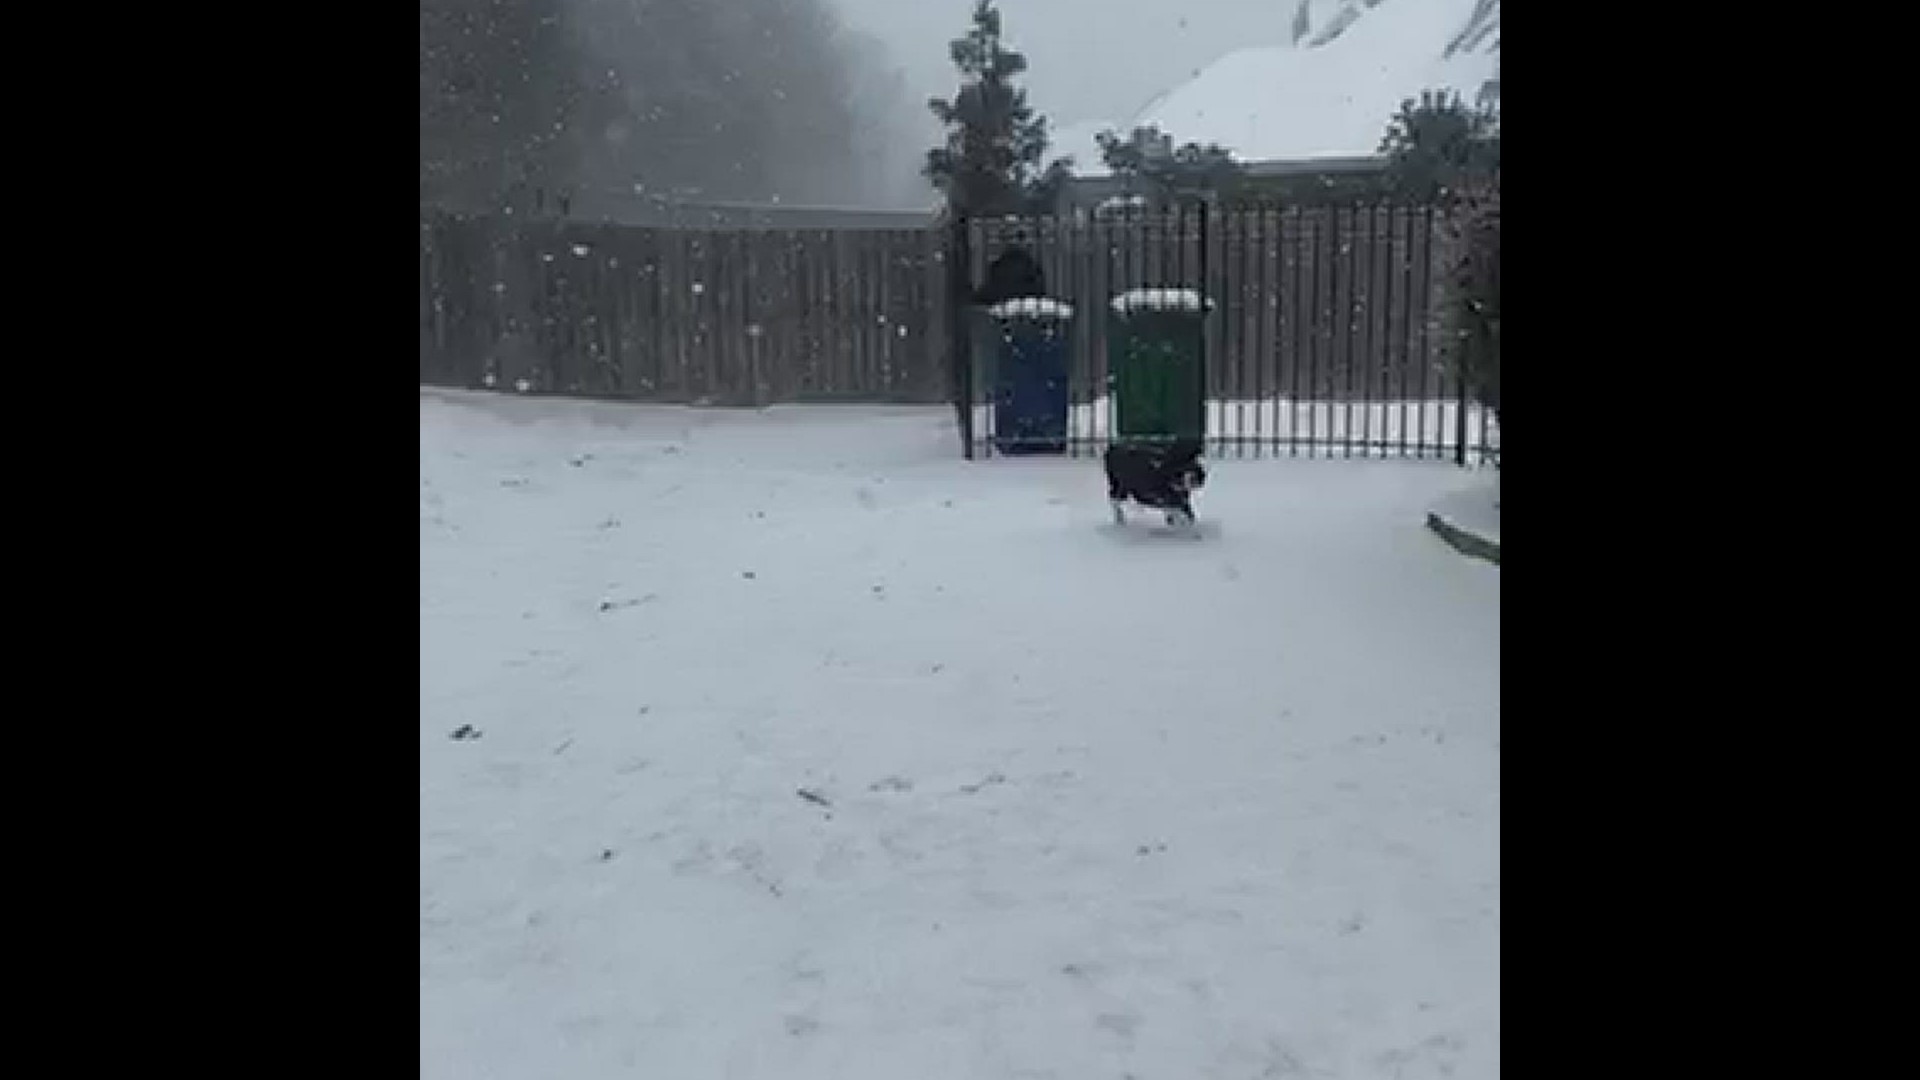 Duke, the English Springer Spaniel, first time to play in snow and he loves it!